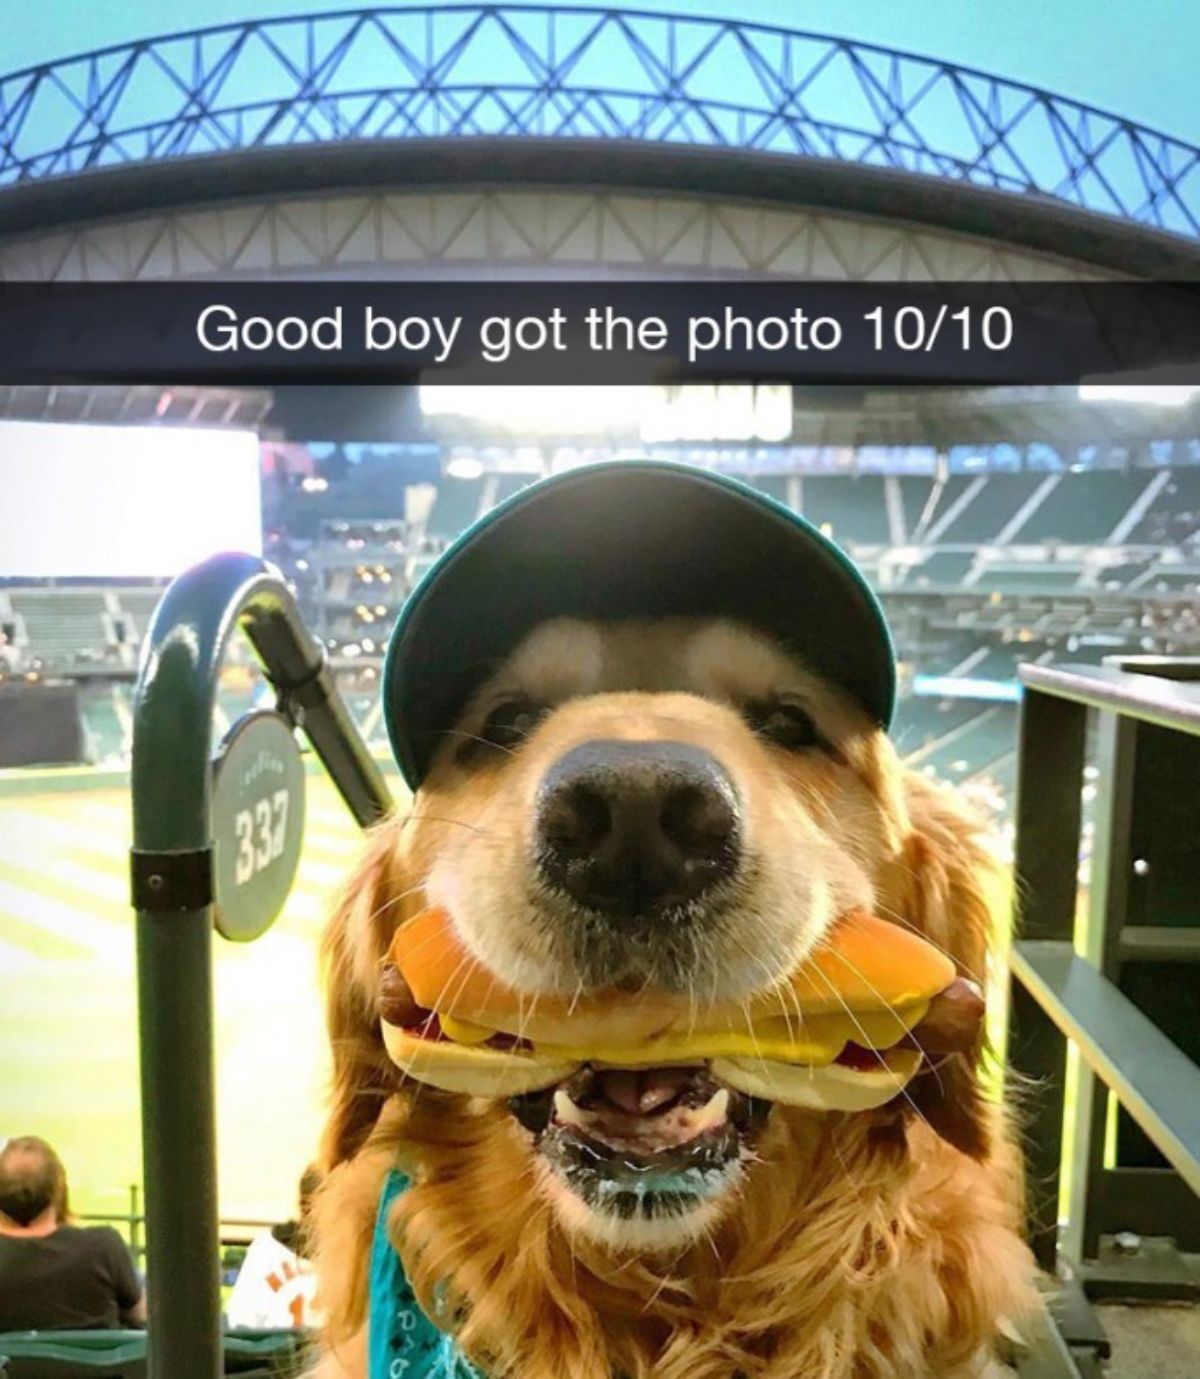 golden retriever with a green cap on in stadium steps with a hotdog in its mouth